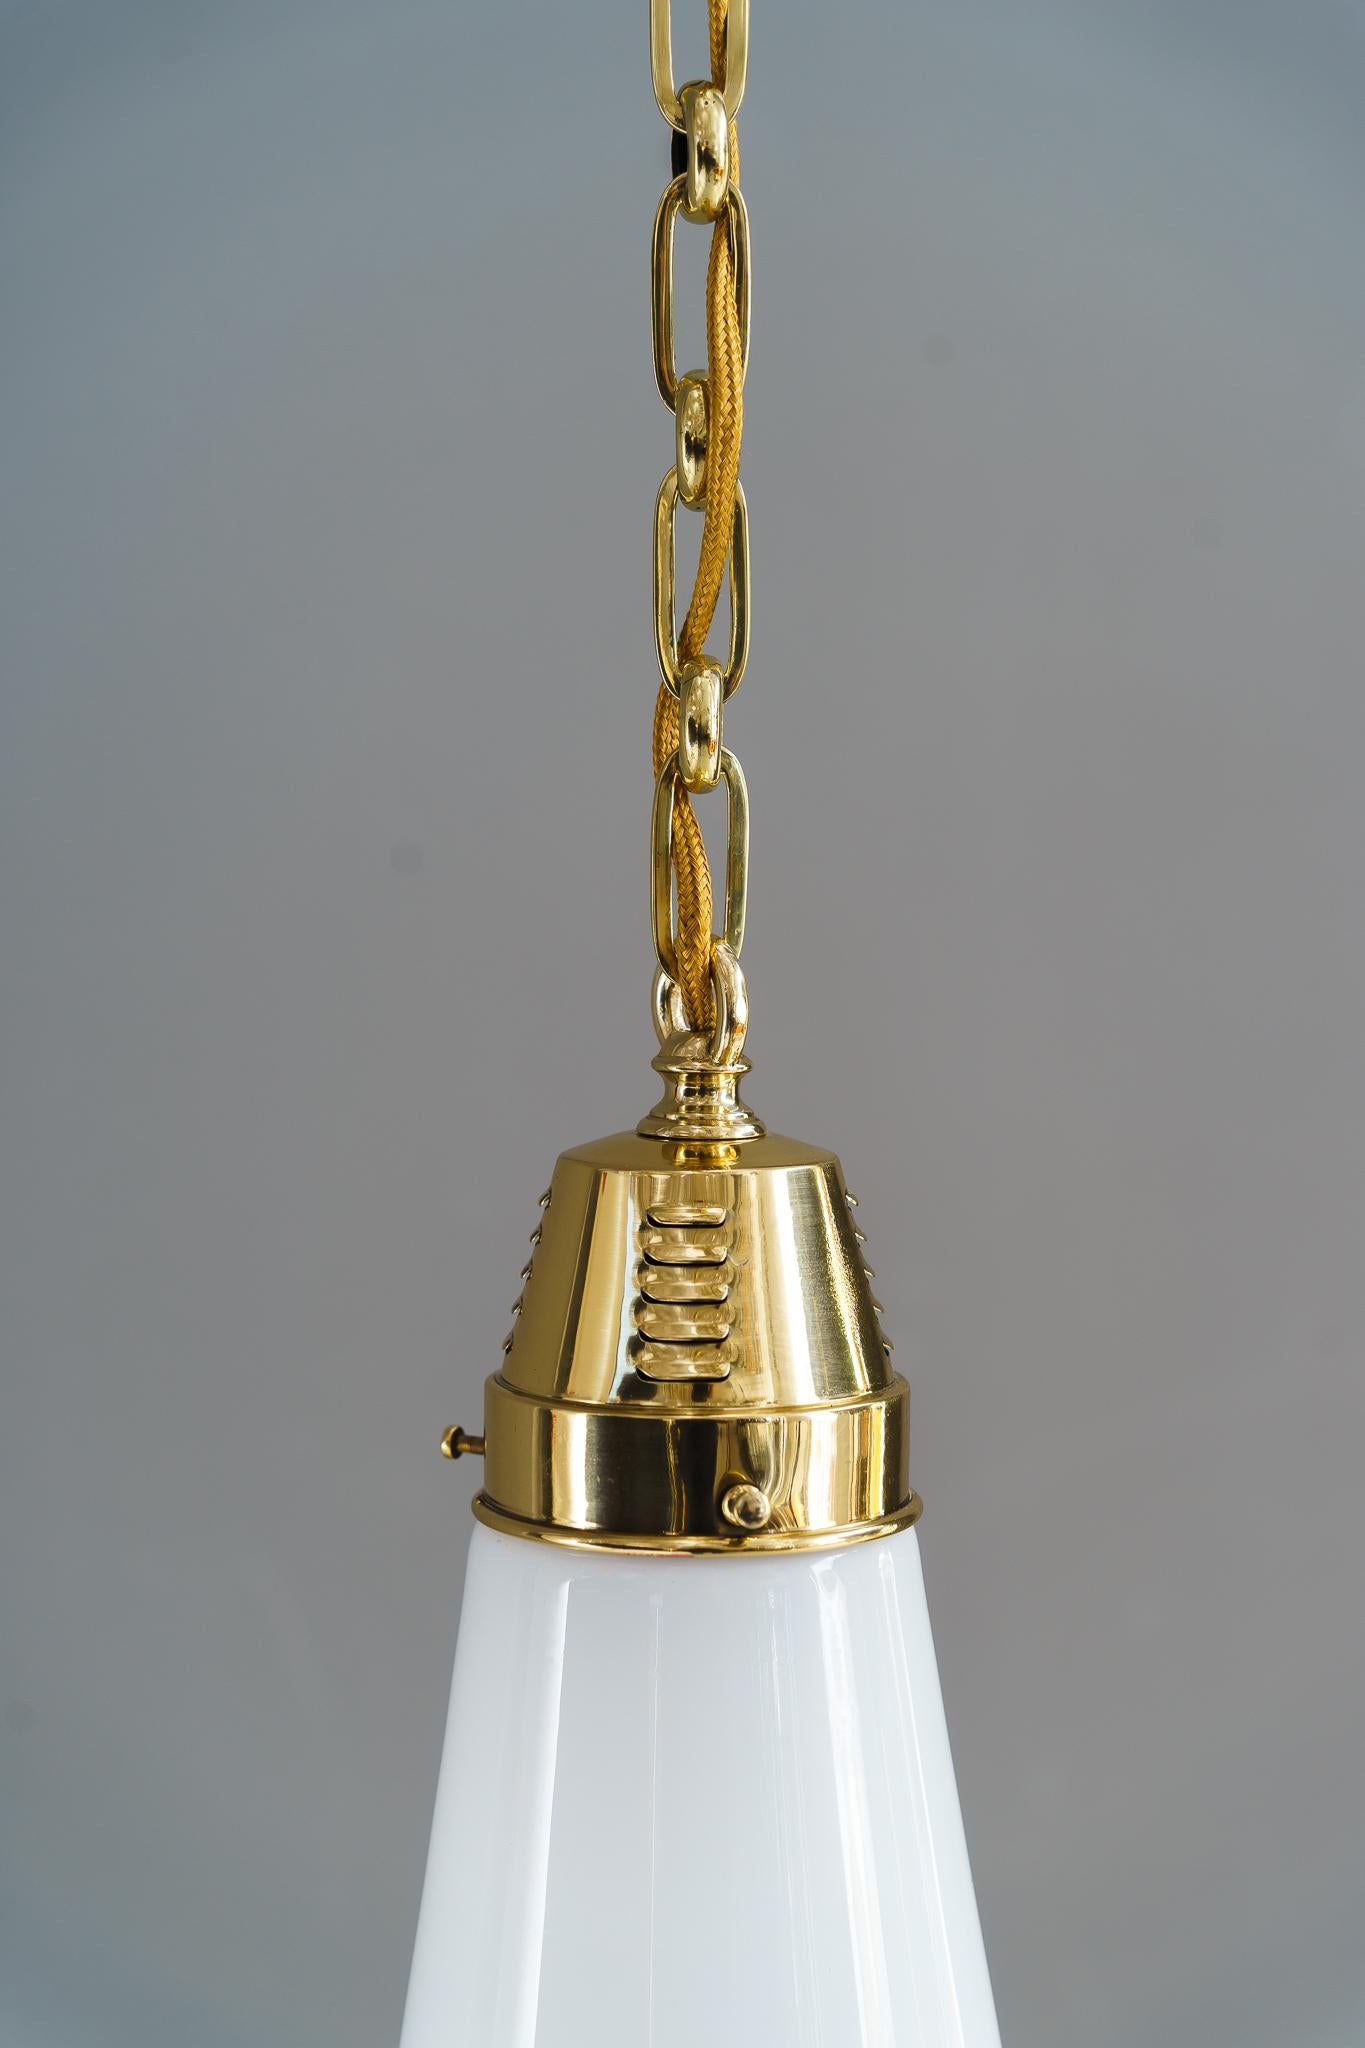 Lacquered 2x Art Deco Hanging lamps germany around 1920s with original old glass shades For Sale